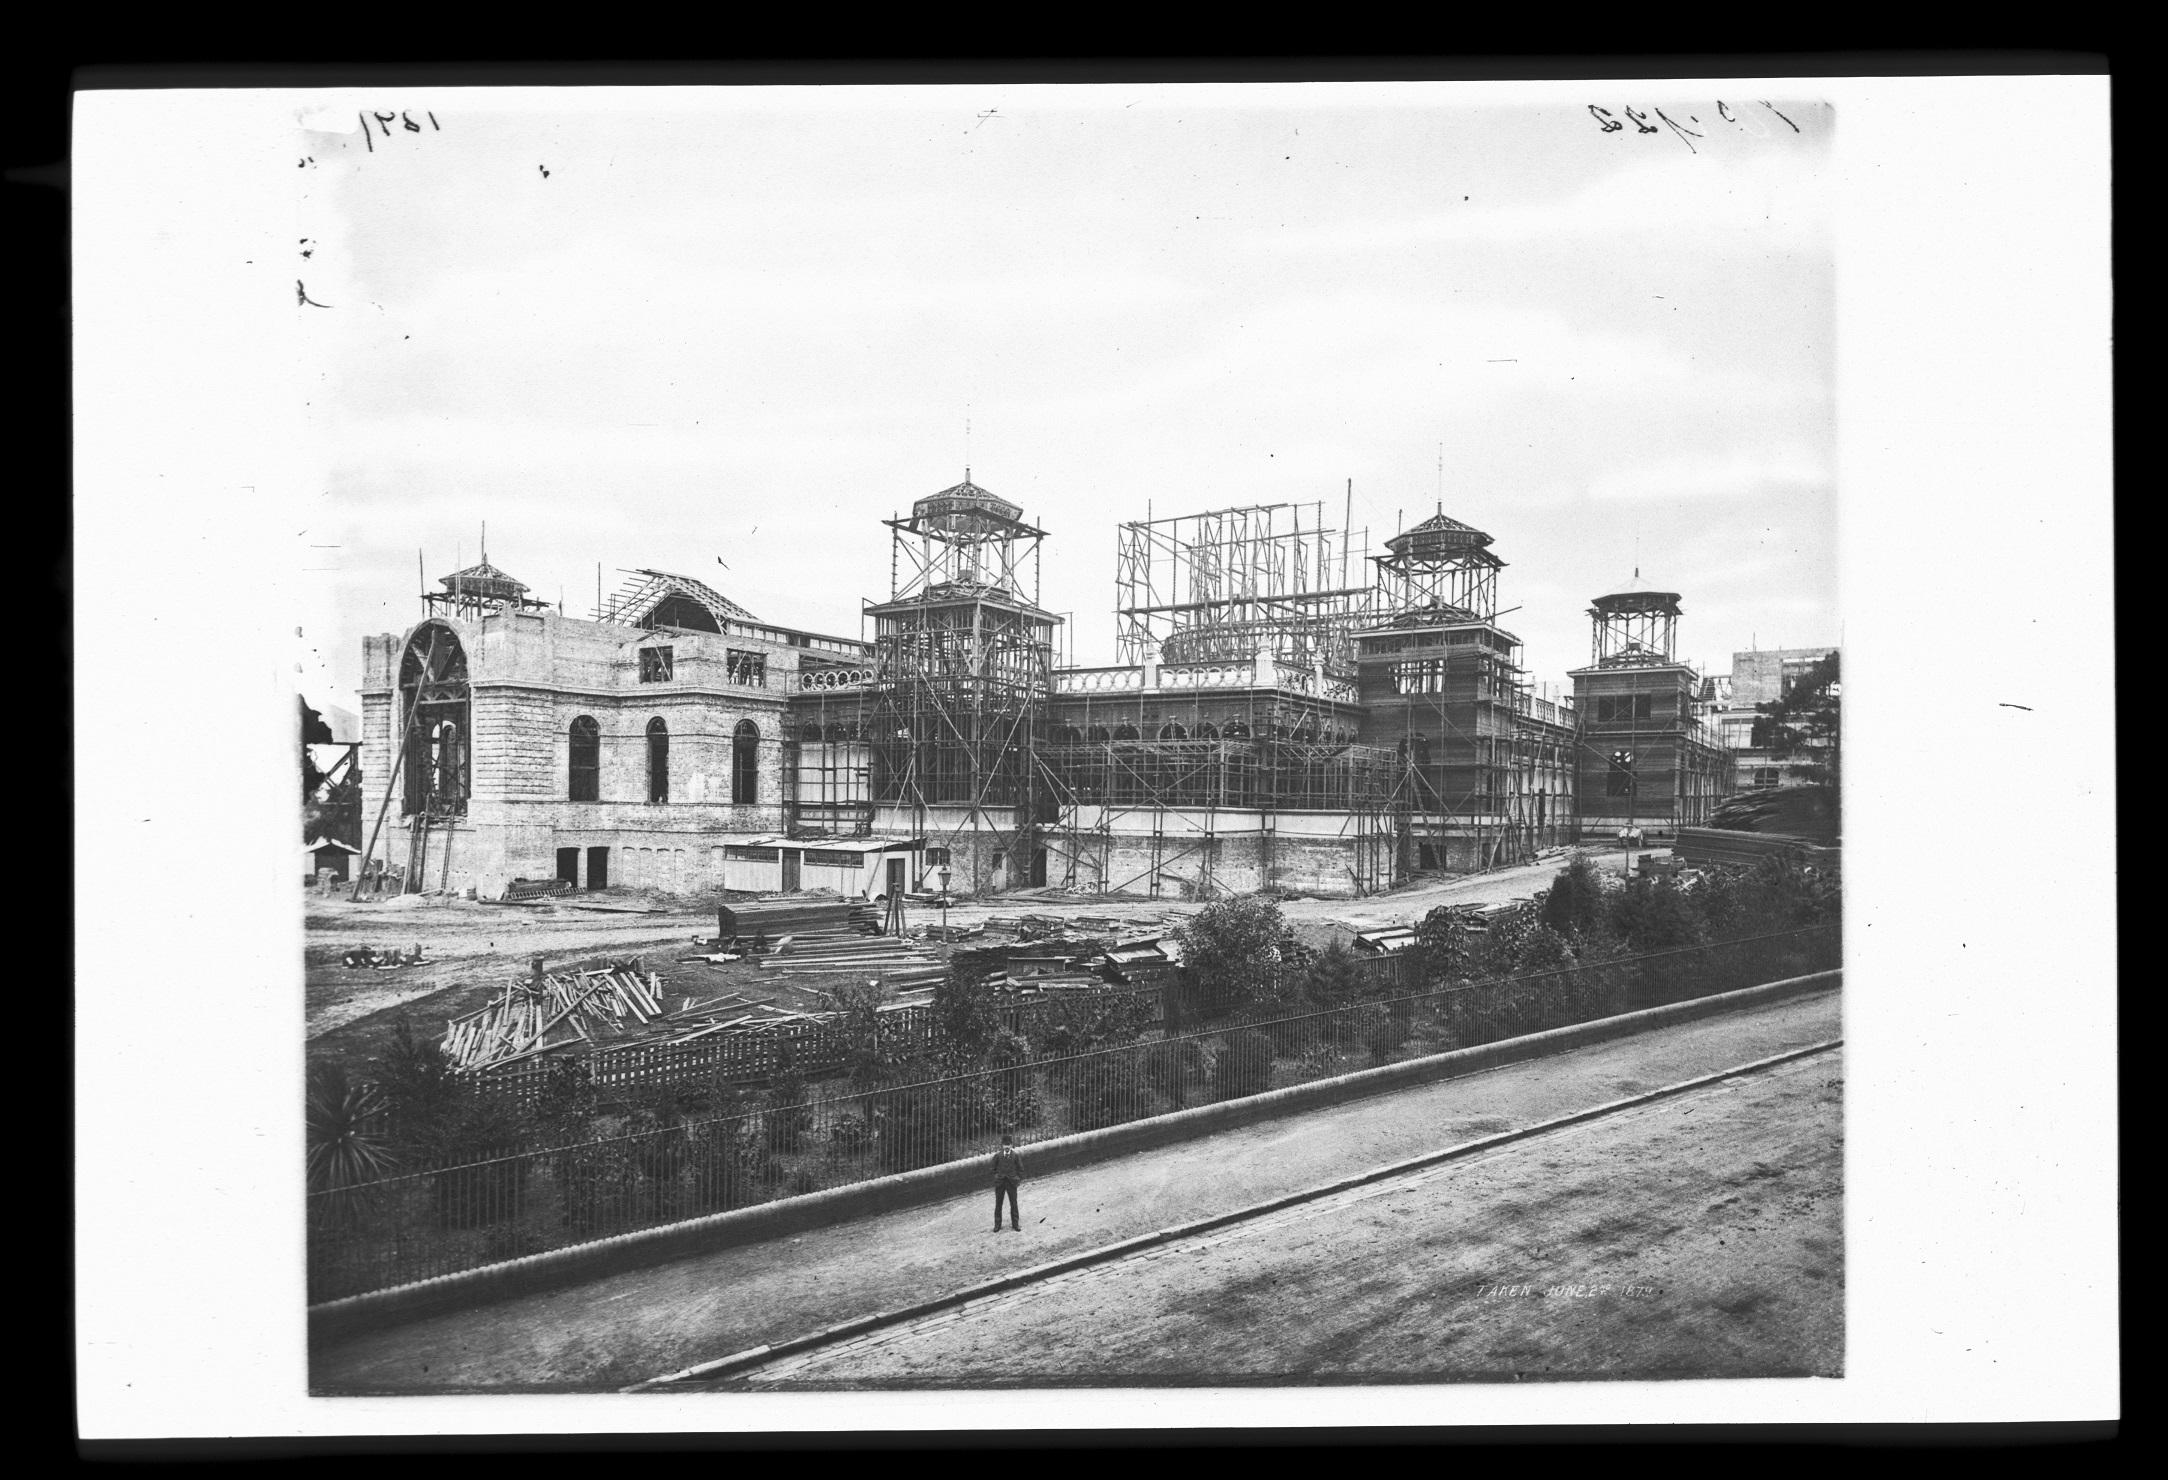 Garden Palace during construction, from Macquarie Street, 1879